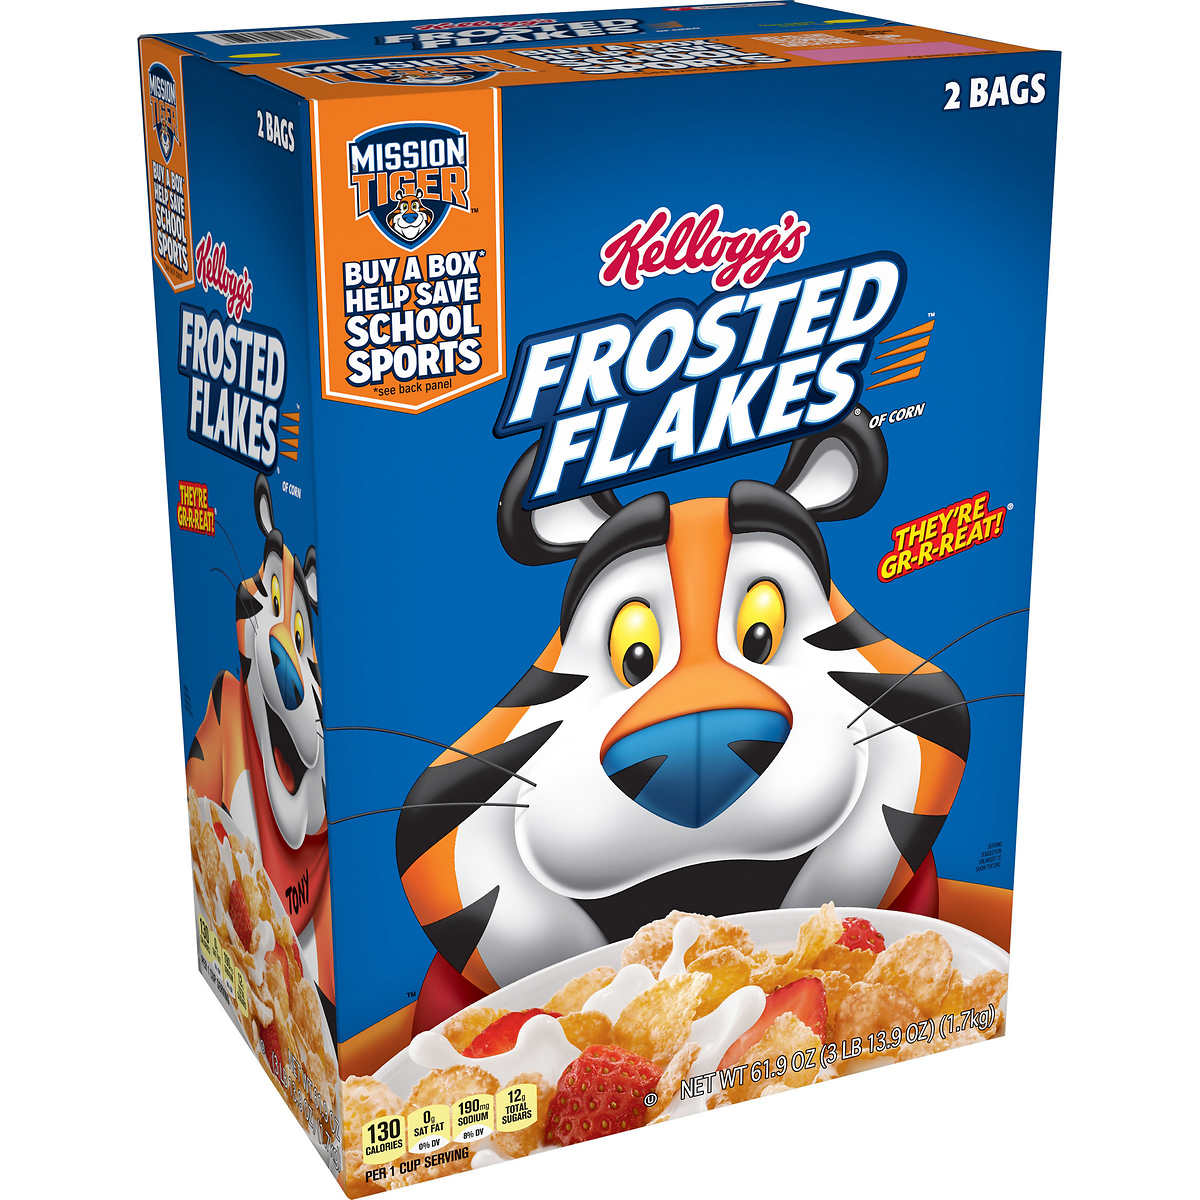 Kellogg's Frosted Flakes, Breakfast Cereal 30.95 oz 2 Bag